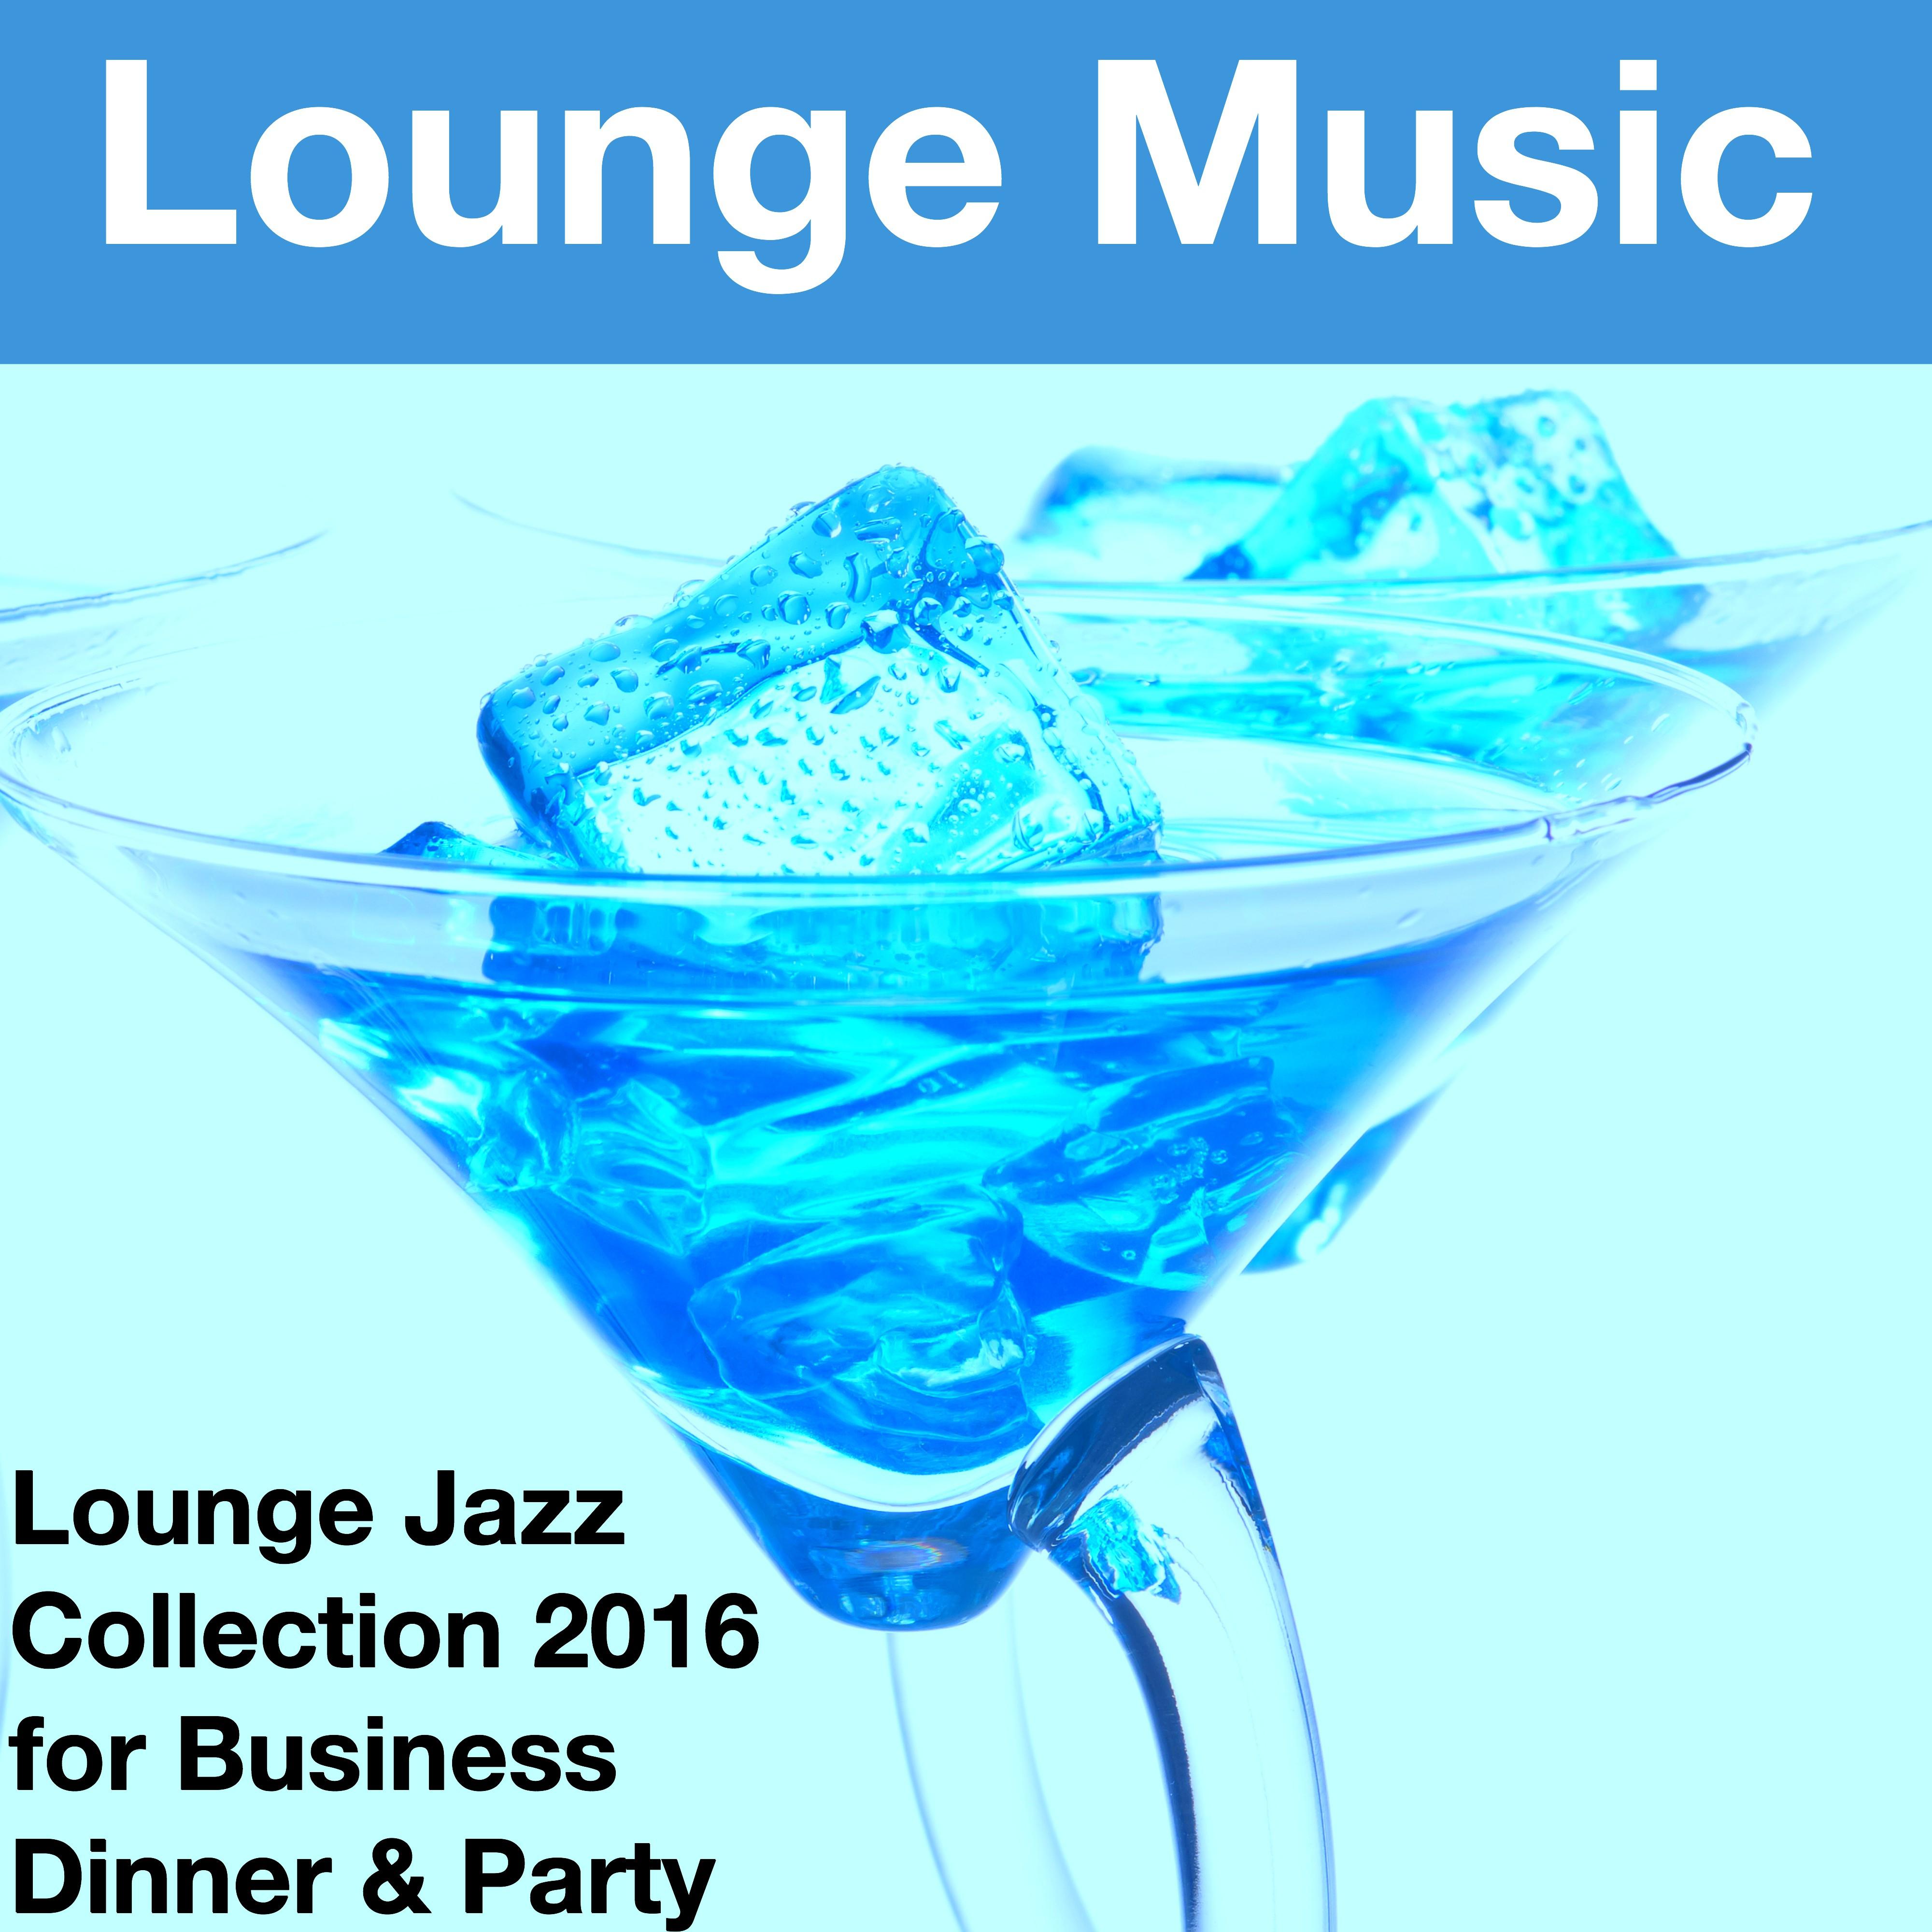 Lounge Music - Lounge Jazz Collection 2016 for Business Dinner & Party